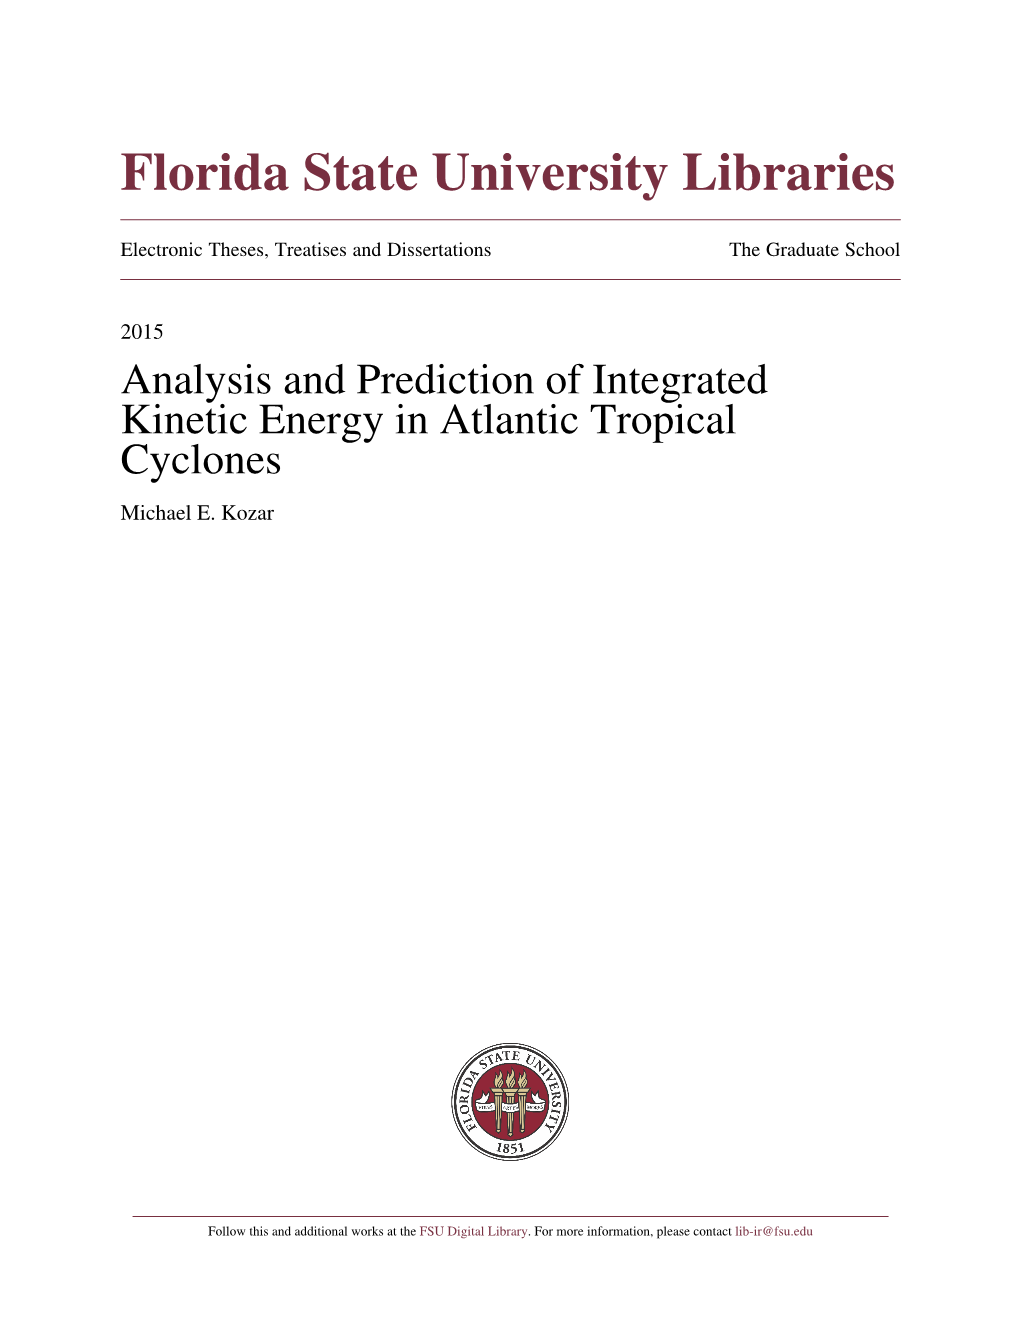 Analysis and Prediction of Integrated Kinetic Energy in Atlantic Tropical Cyclones Michael E